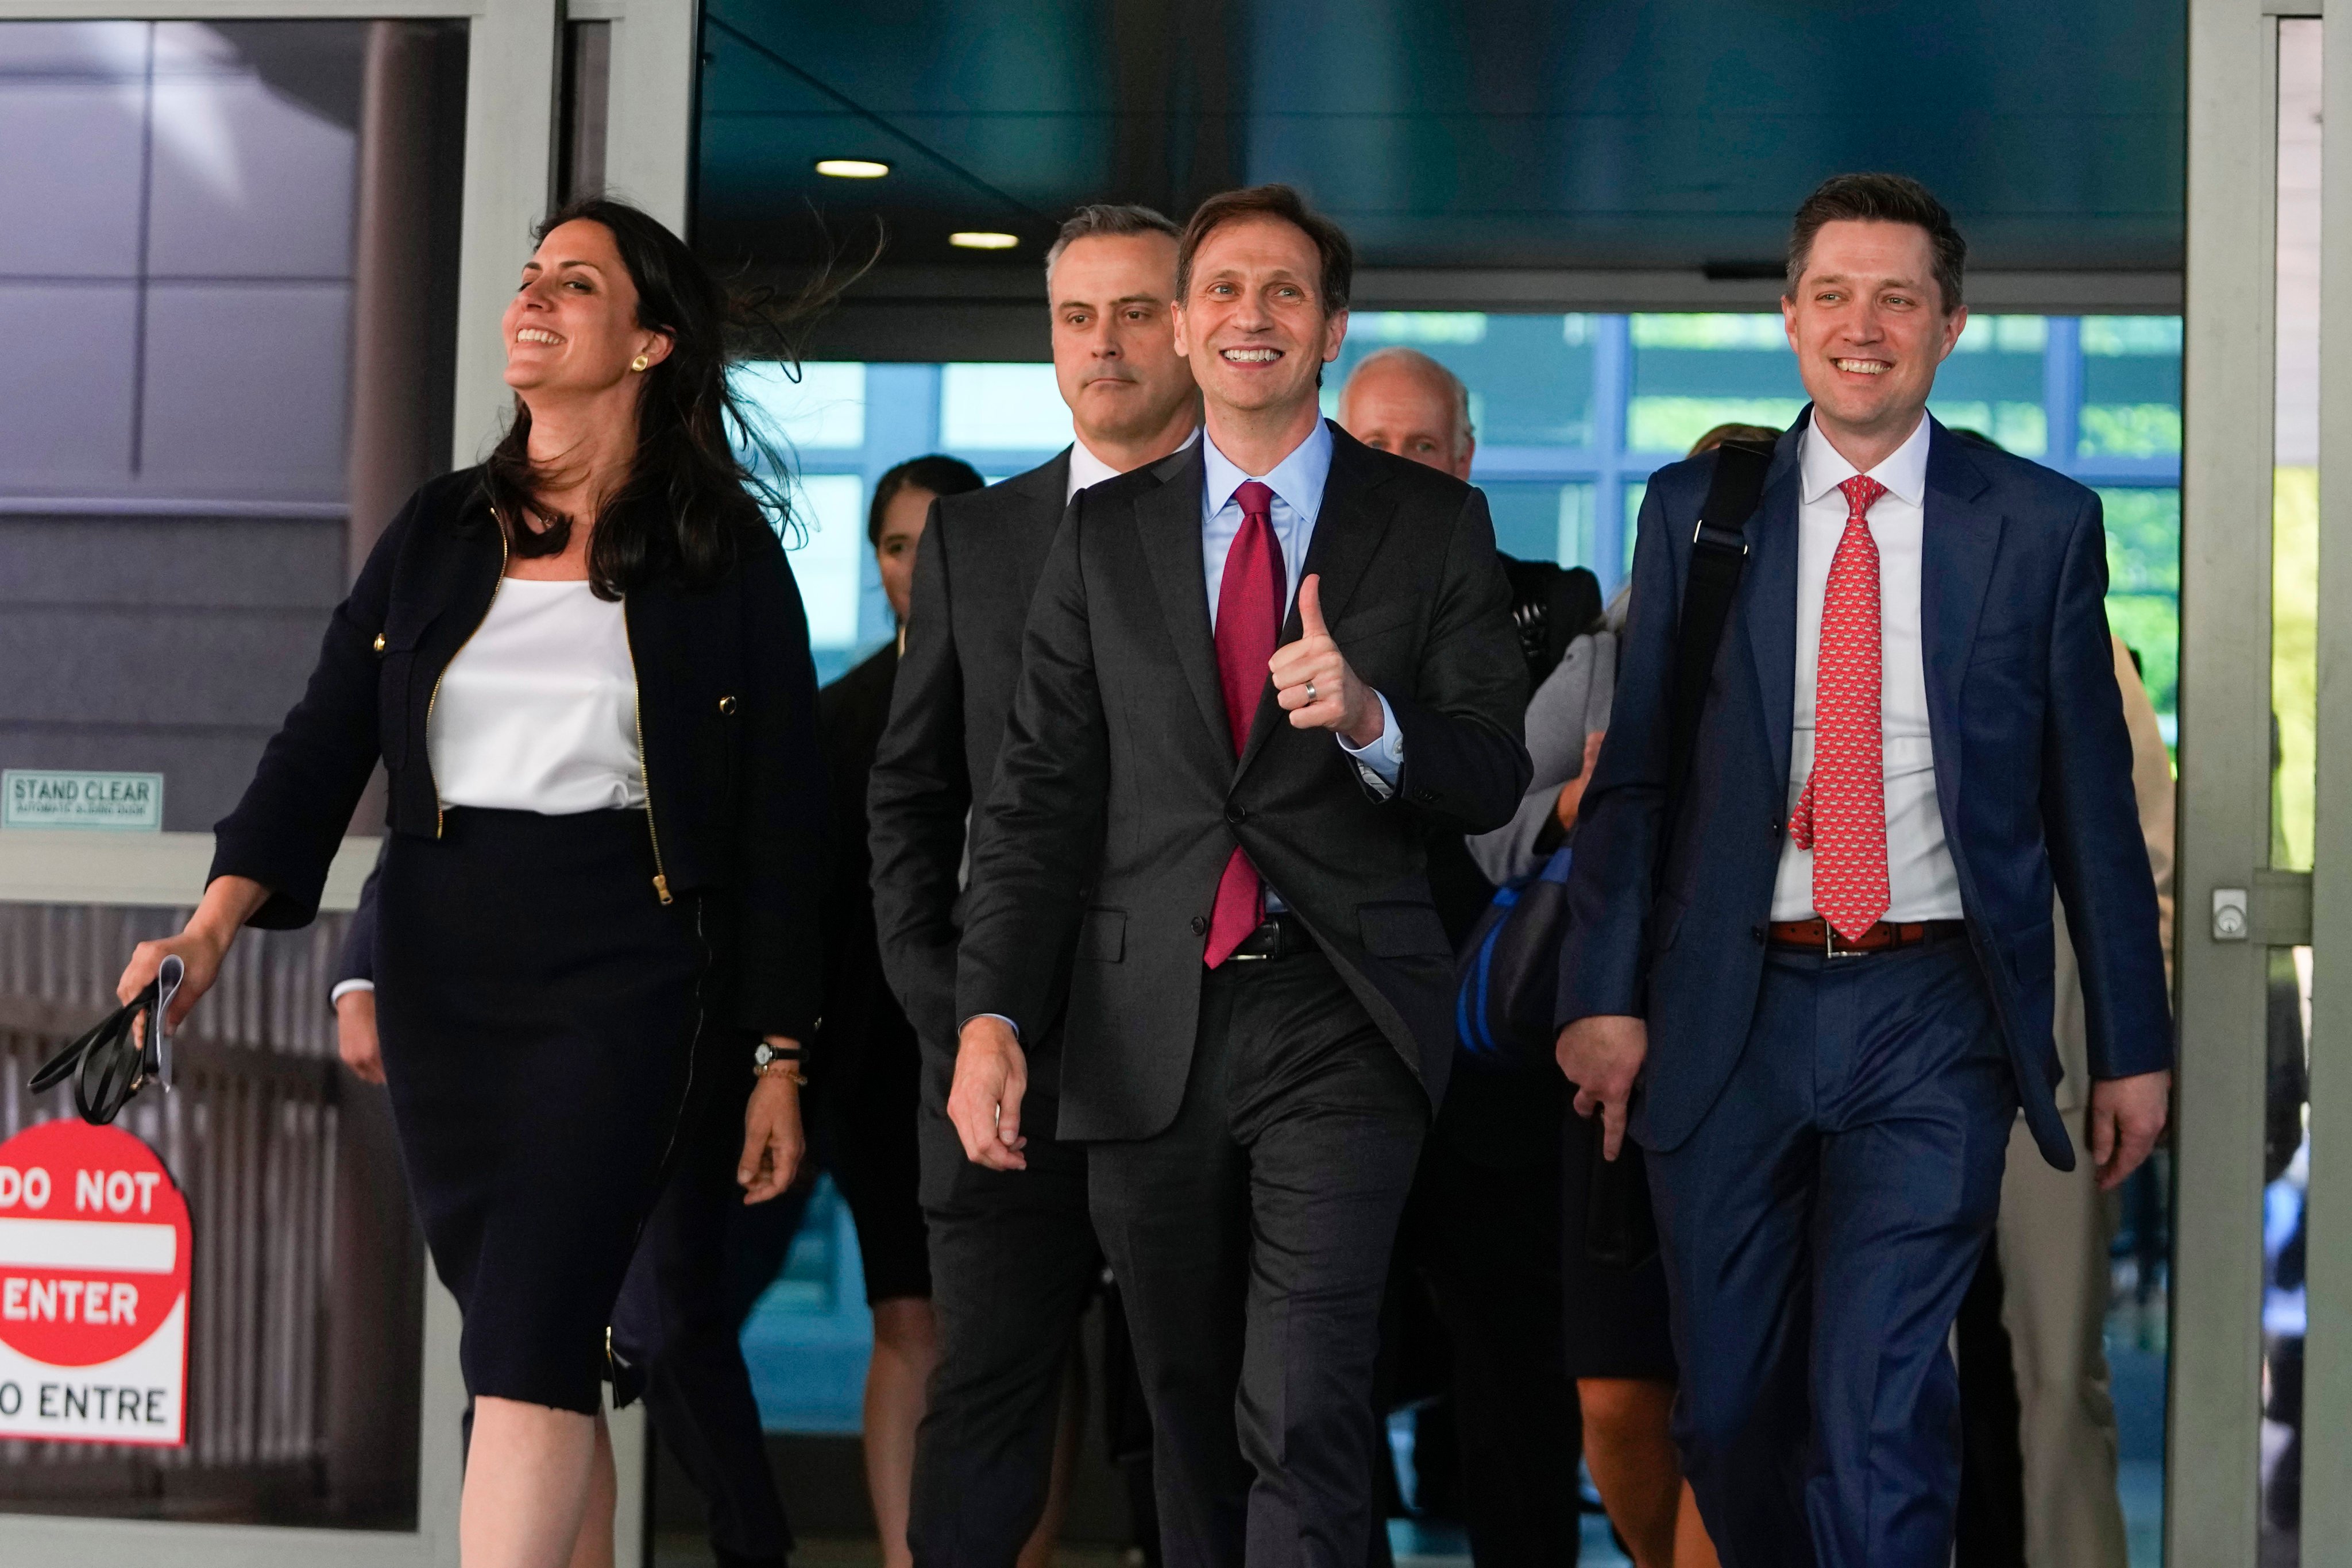 Lawyers for Dominion Voting Systems exit the New Castle County Courthouse in Wilmington, Delaware, after the defamation lawsuit was settled. Photo: AP